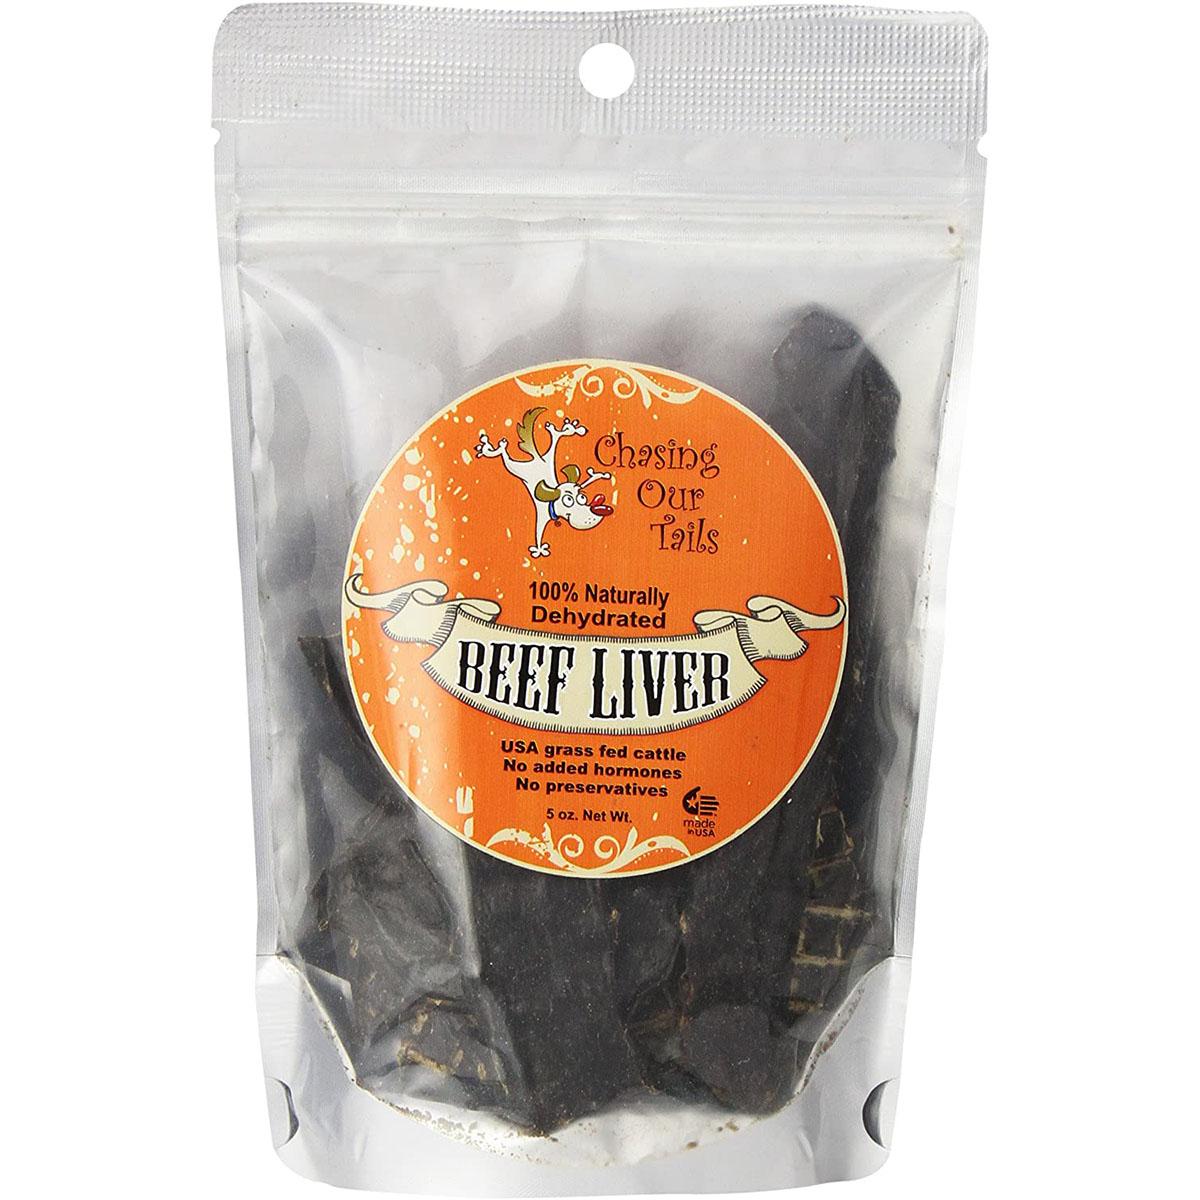 Chasing Our Tails Dehydrated Beef Liver Dog Treats